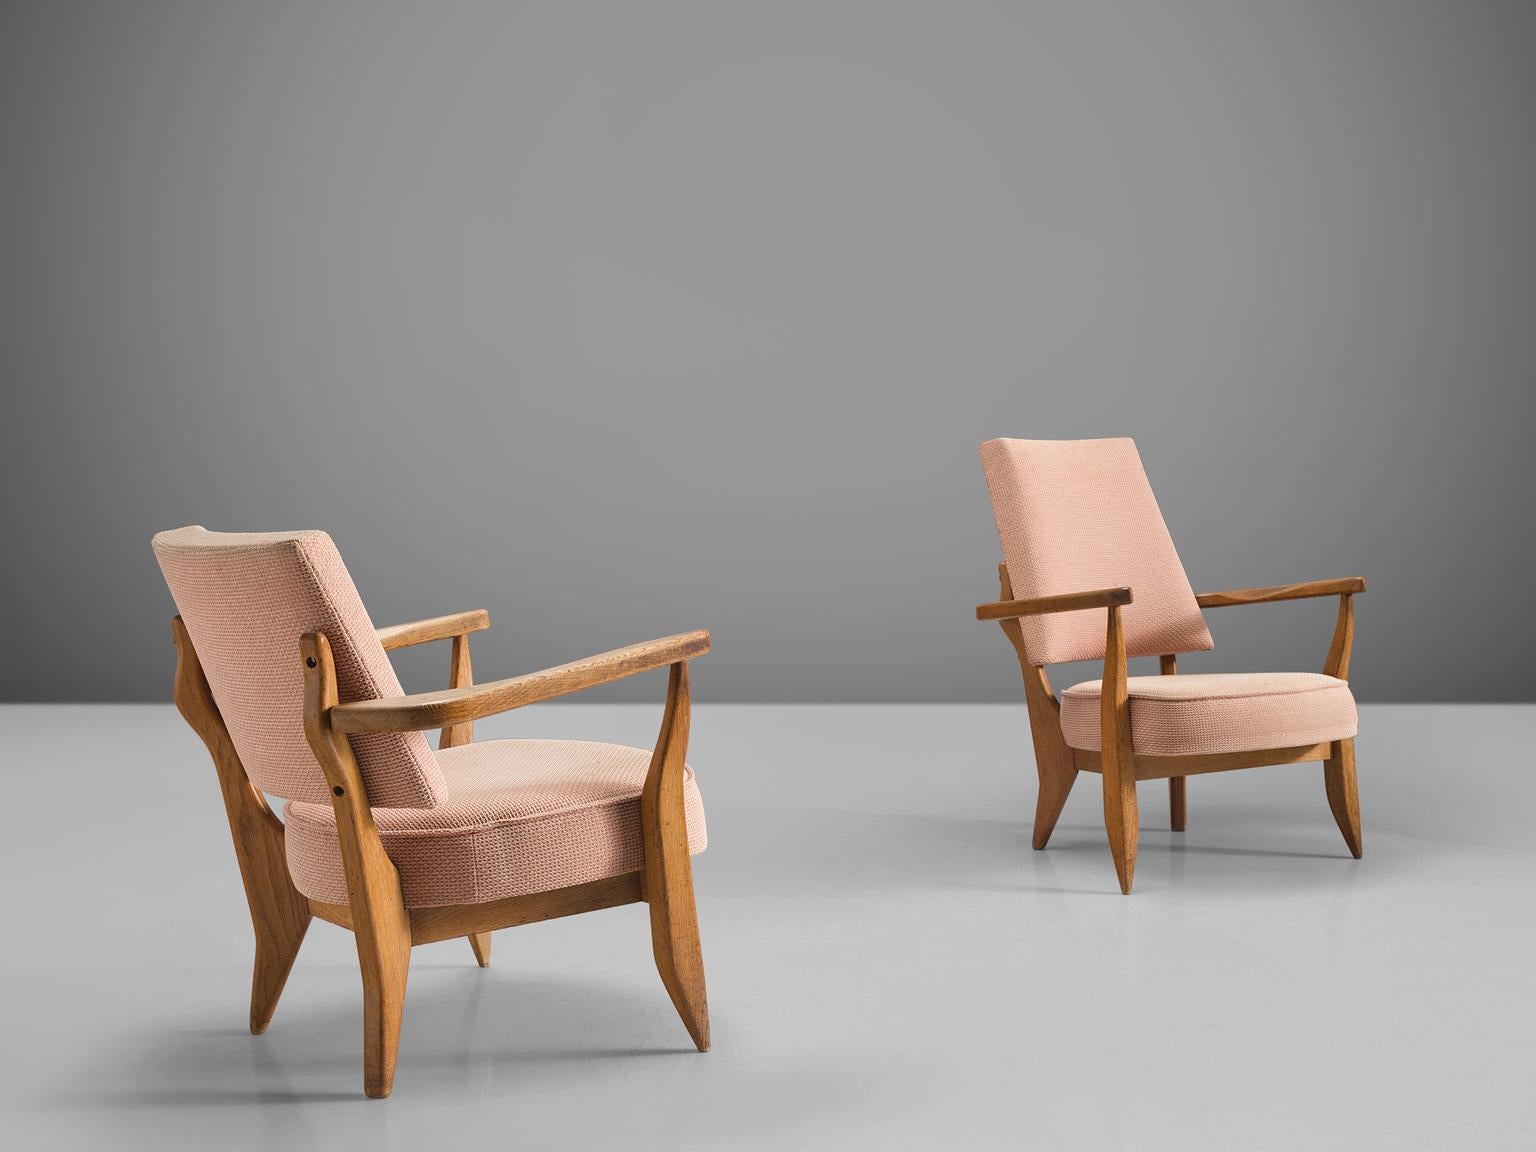 Guillerme et Chambron, pair of easy chairs, pink fabric, oak, France, 1950s

These sculptural easy chairs by Guillerme and Chambron are very well executed and made out of solid, carved oak. The greatly comfortable armchairs feature an interesting